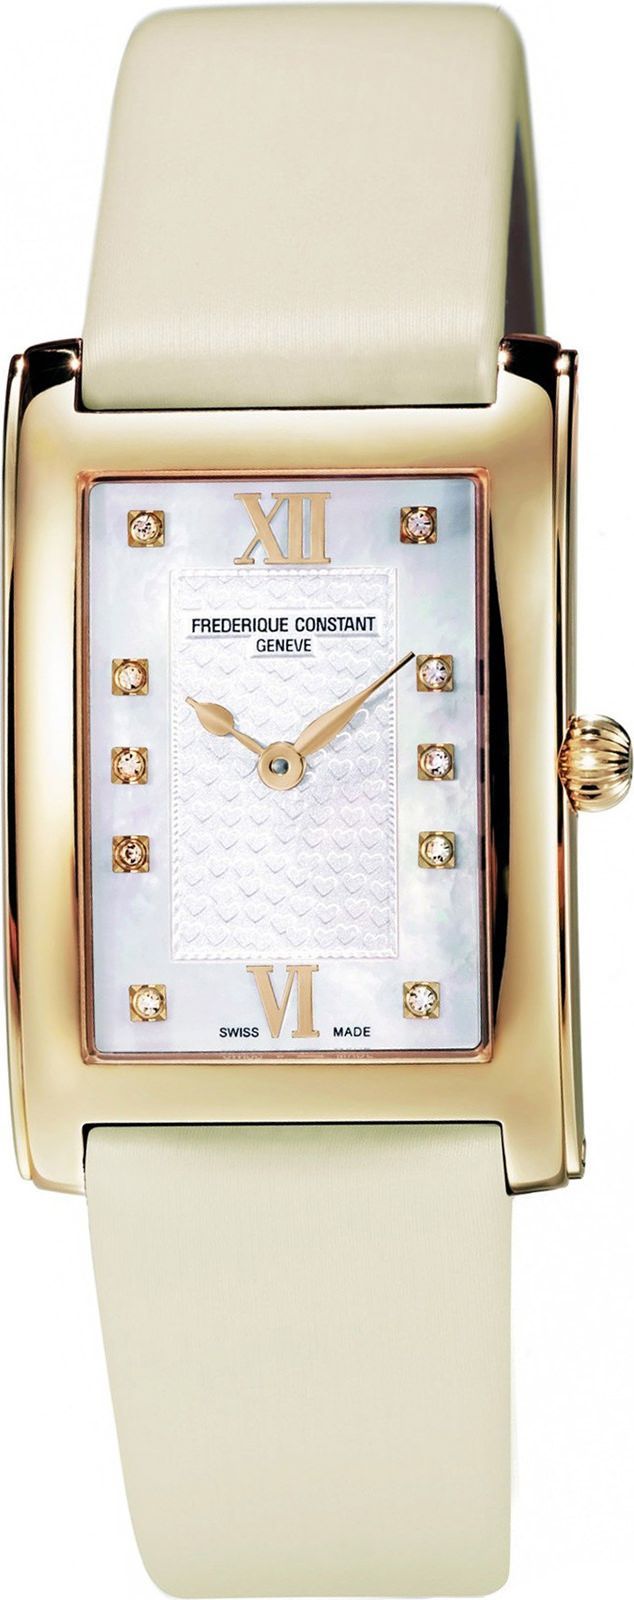 Frederique Constant  26 mm Watch in MOP Dial For Women - 1